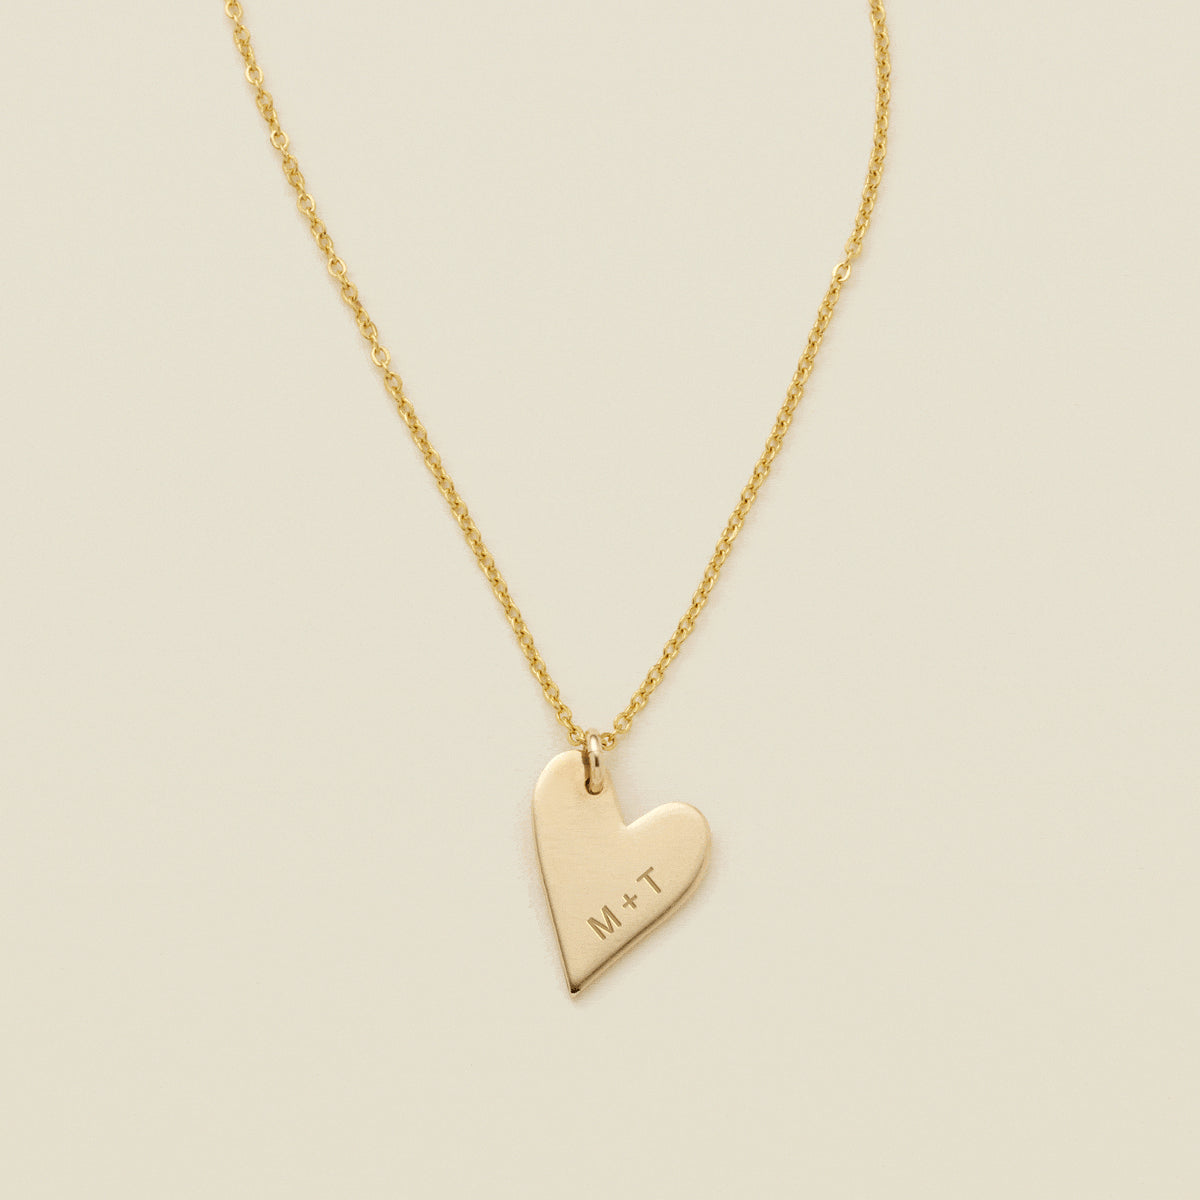 Delicate and sweet gorgeous designer V letter pendant necklace is